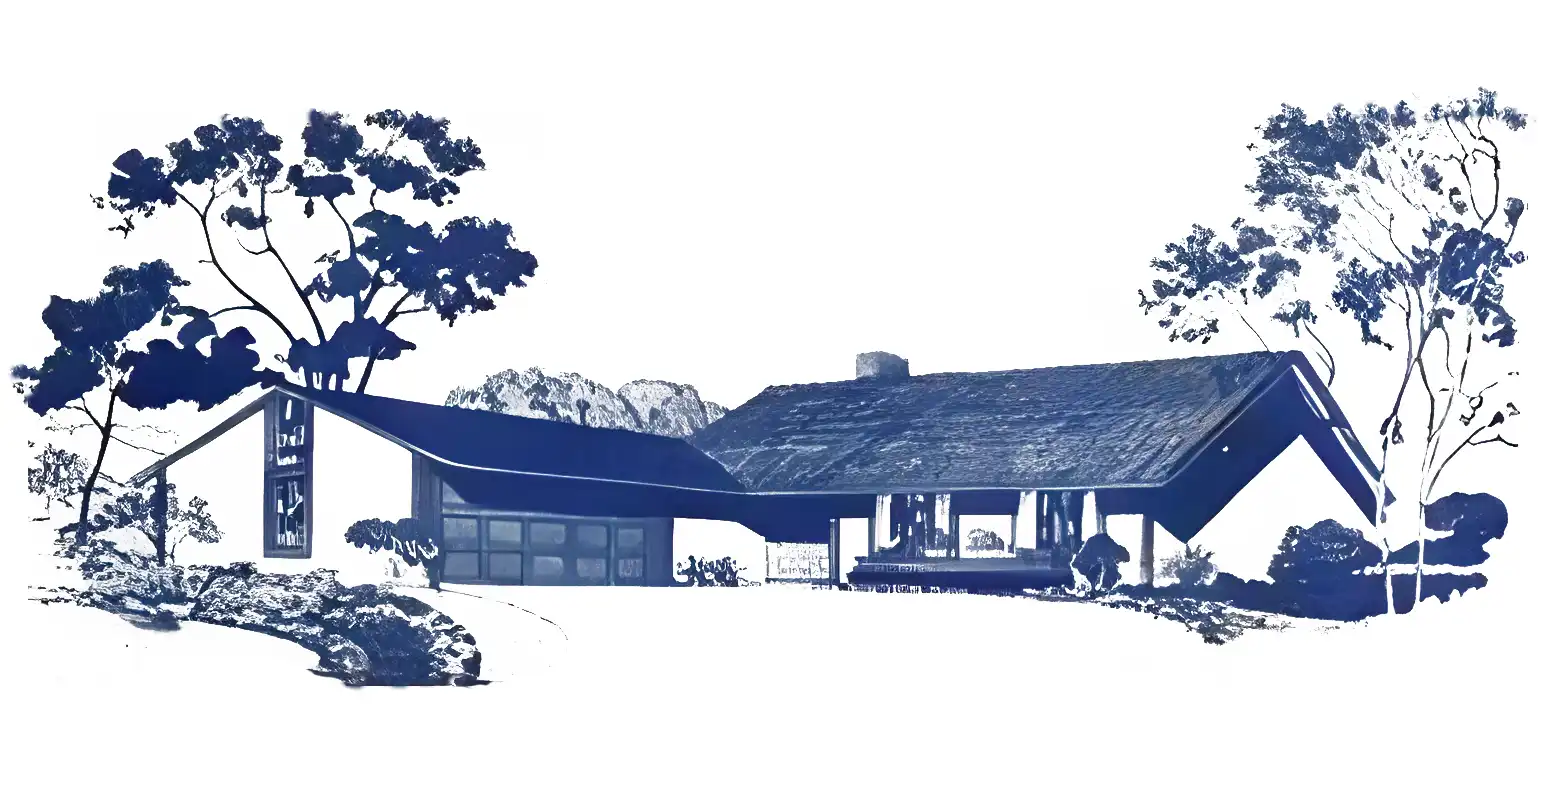 Monochrome rendering of 1960s ranch style house, simple gable roof variant.